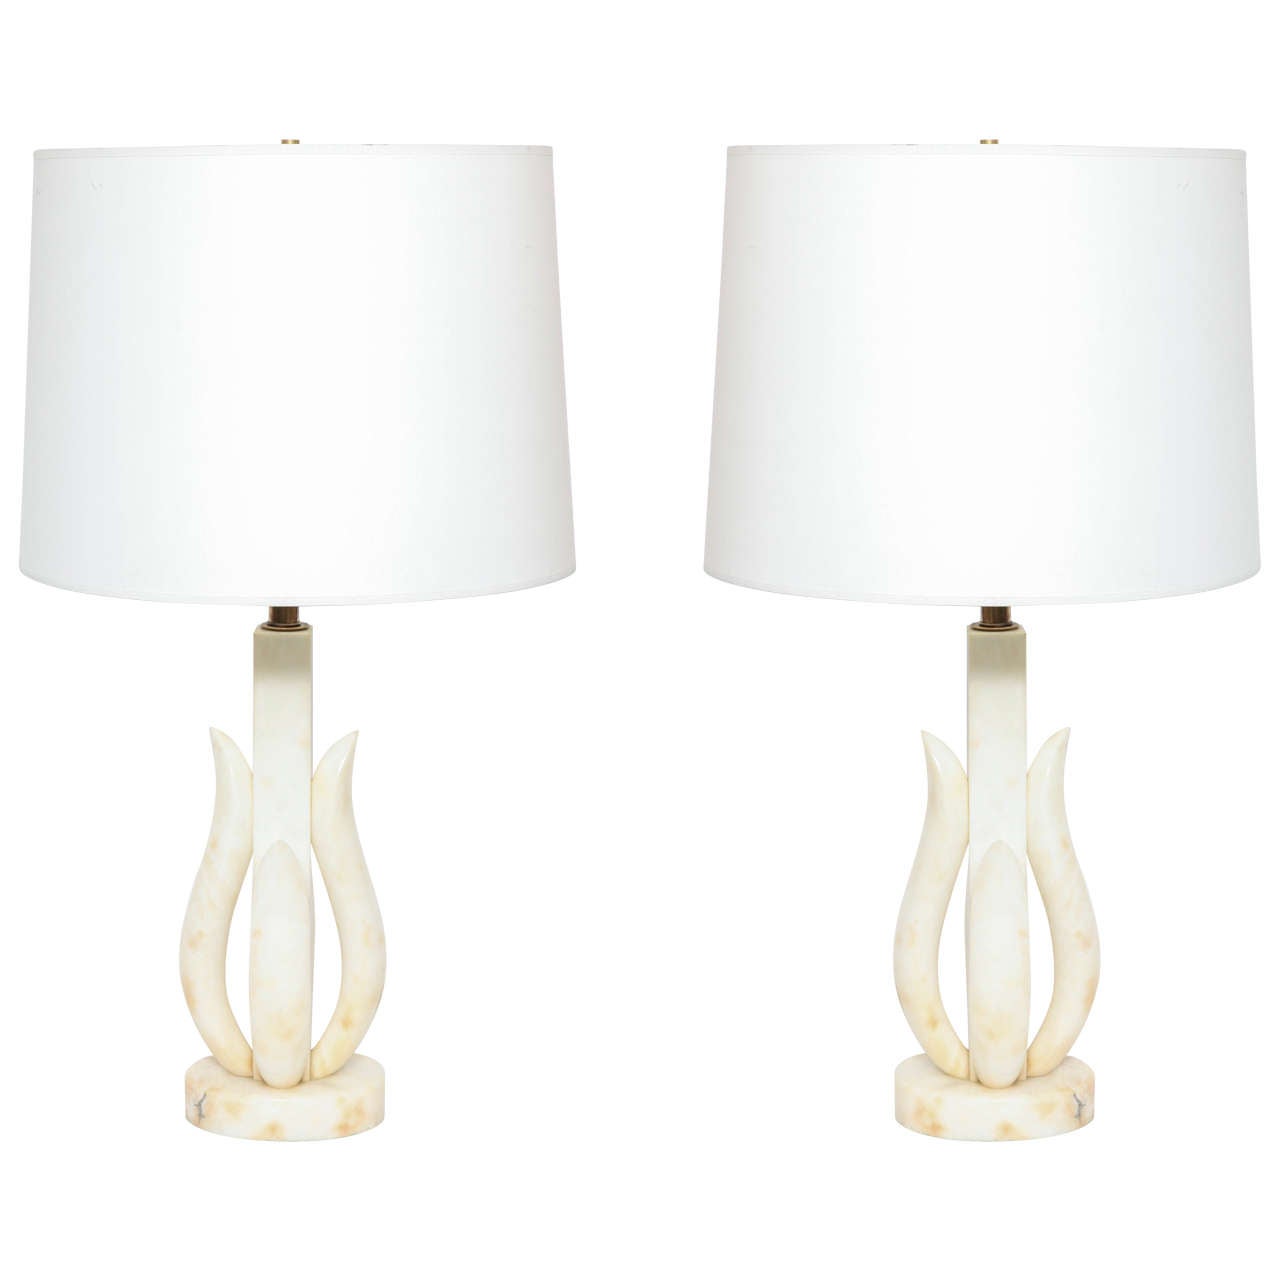 Pair of 1950s Italian Alabaster Table Lamps